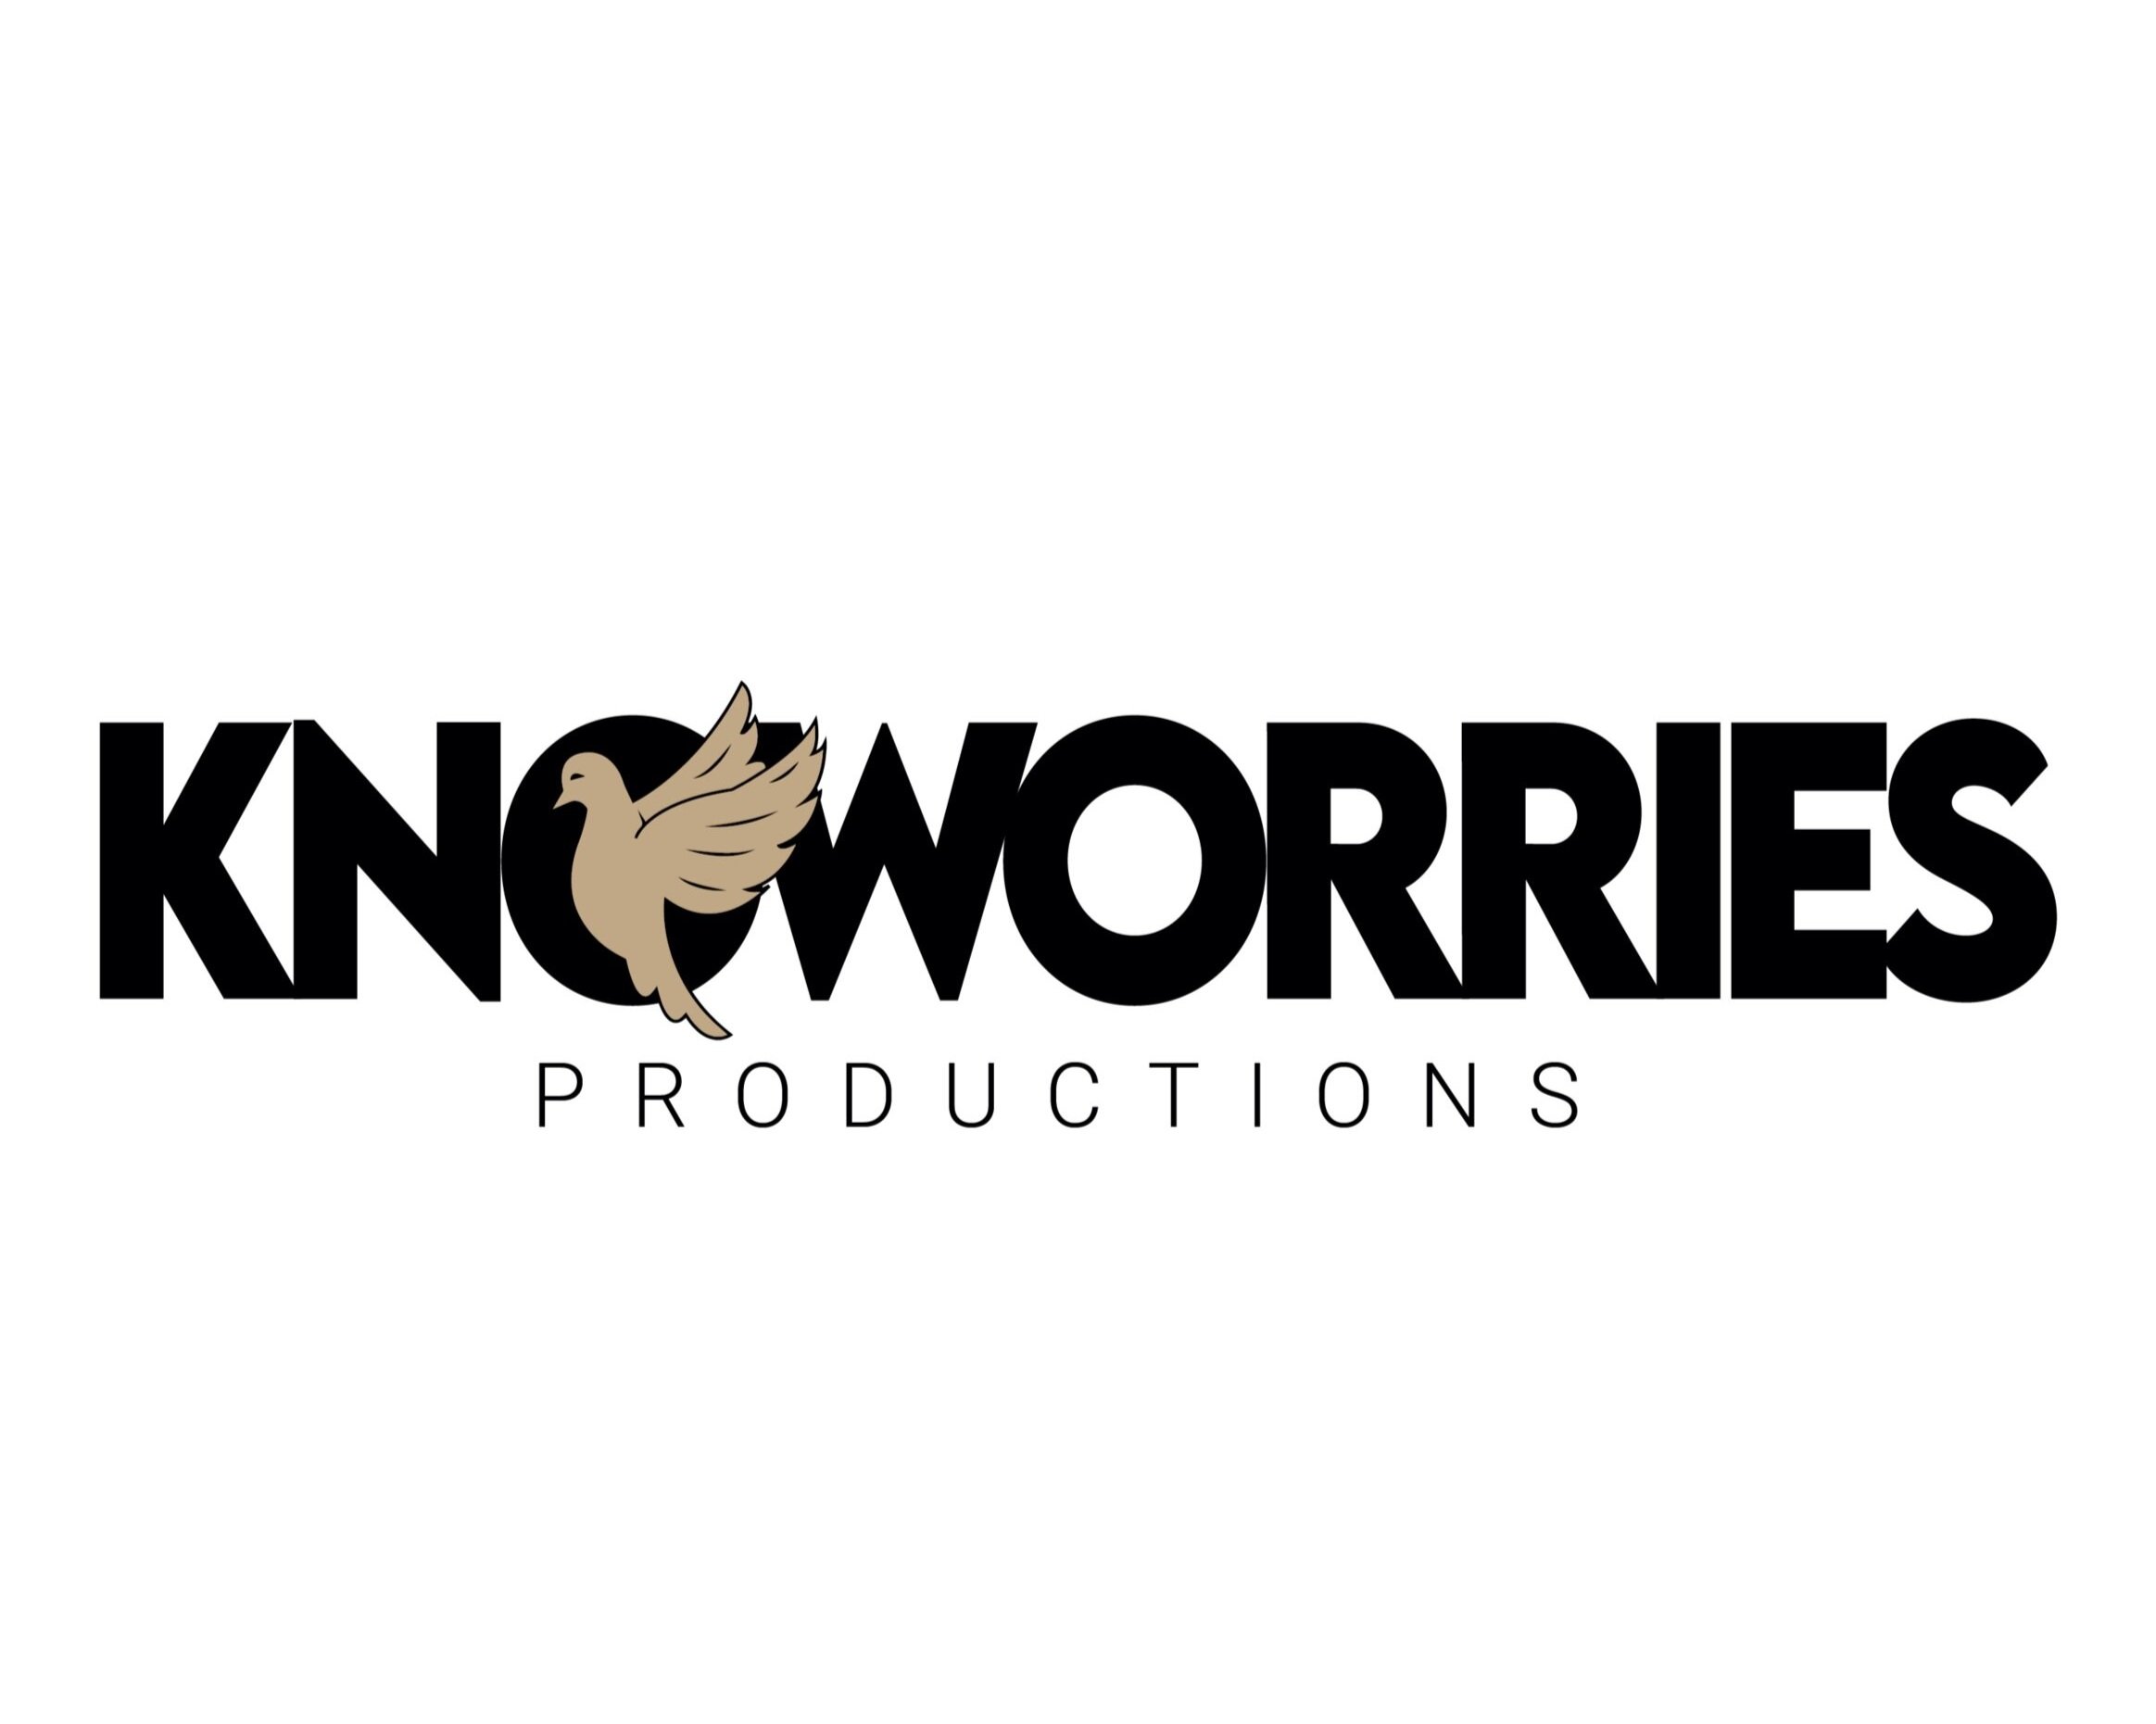 A Knoworries Production